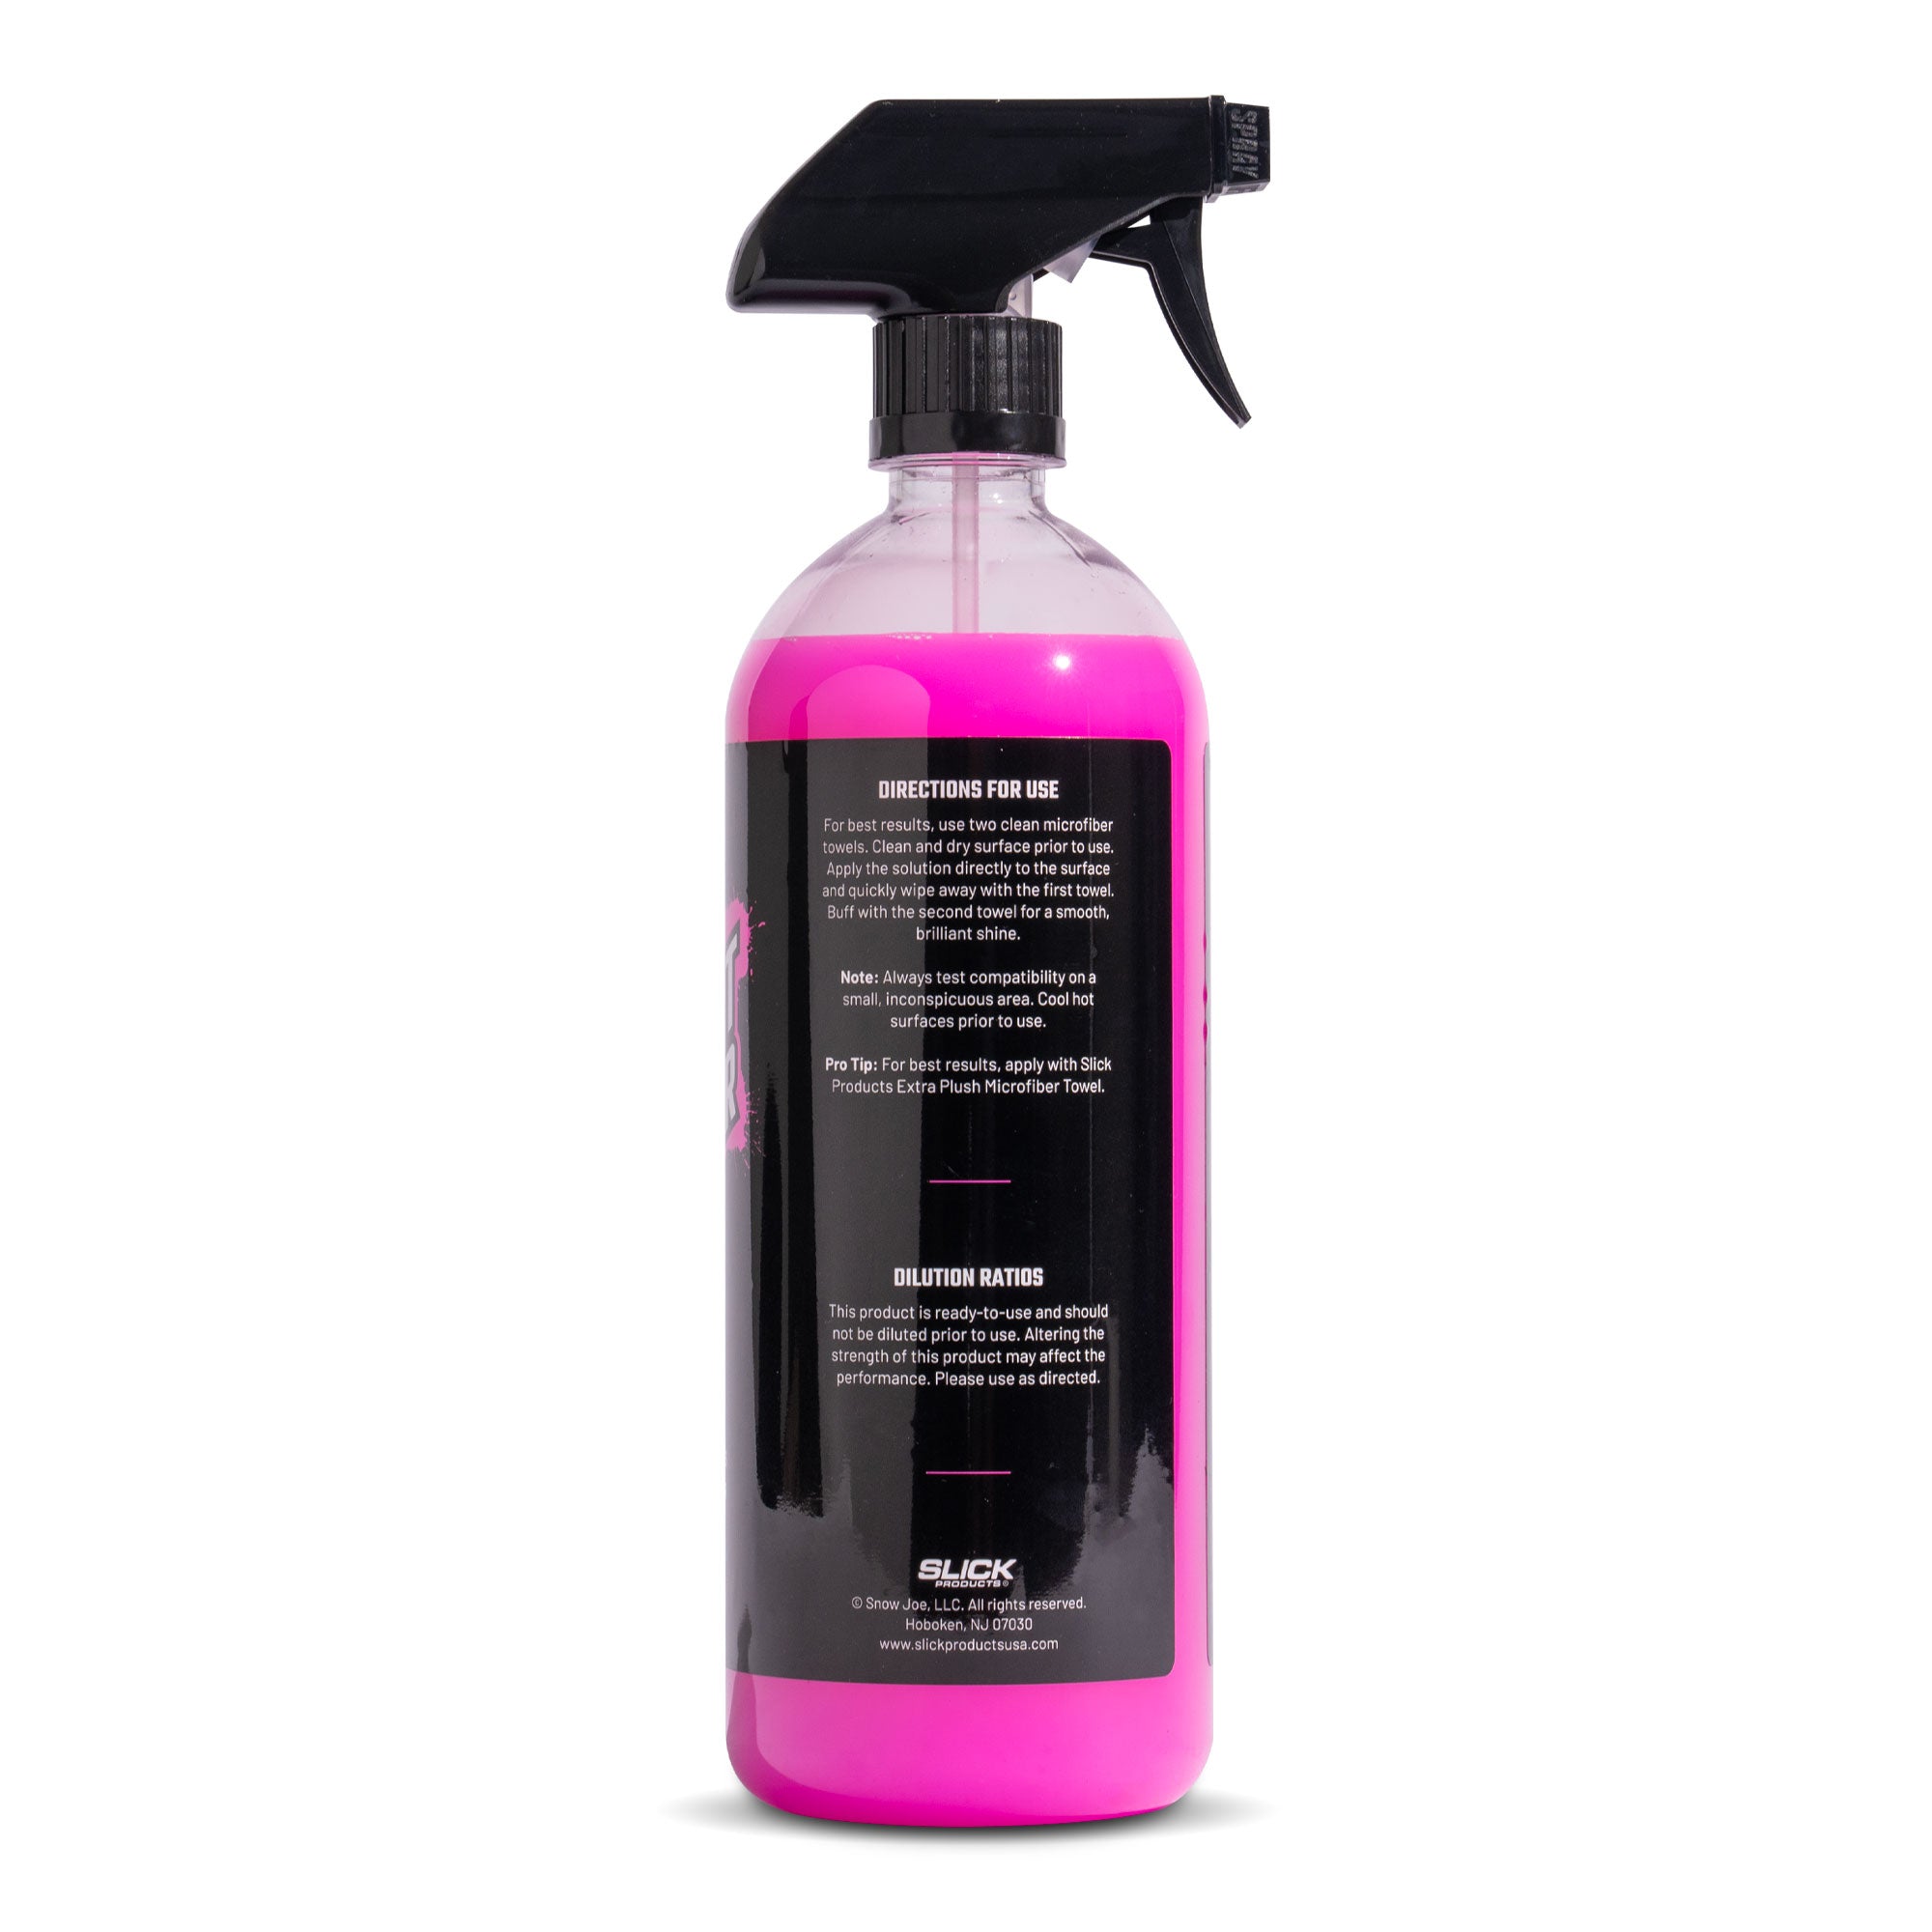 Diluting Turtle Wax Hybrid Solutions Ceramic 3-in-1 Detailer. Good